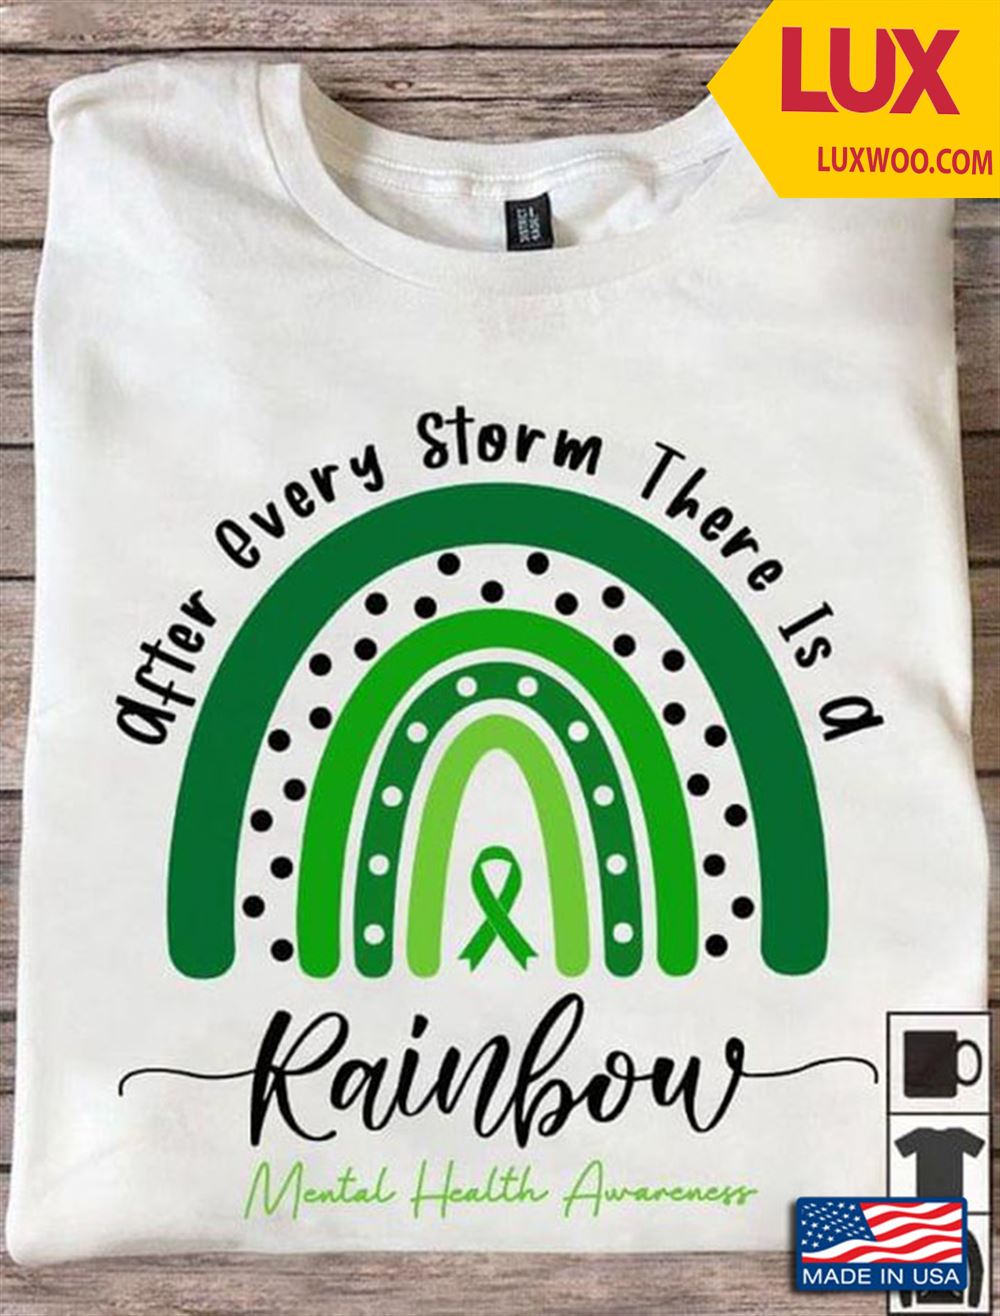 After Every Storm There Is A Rainbow Mental Health Awareness Tshirt Size Up To 5xl